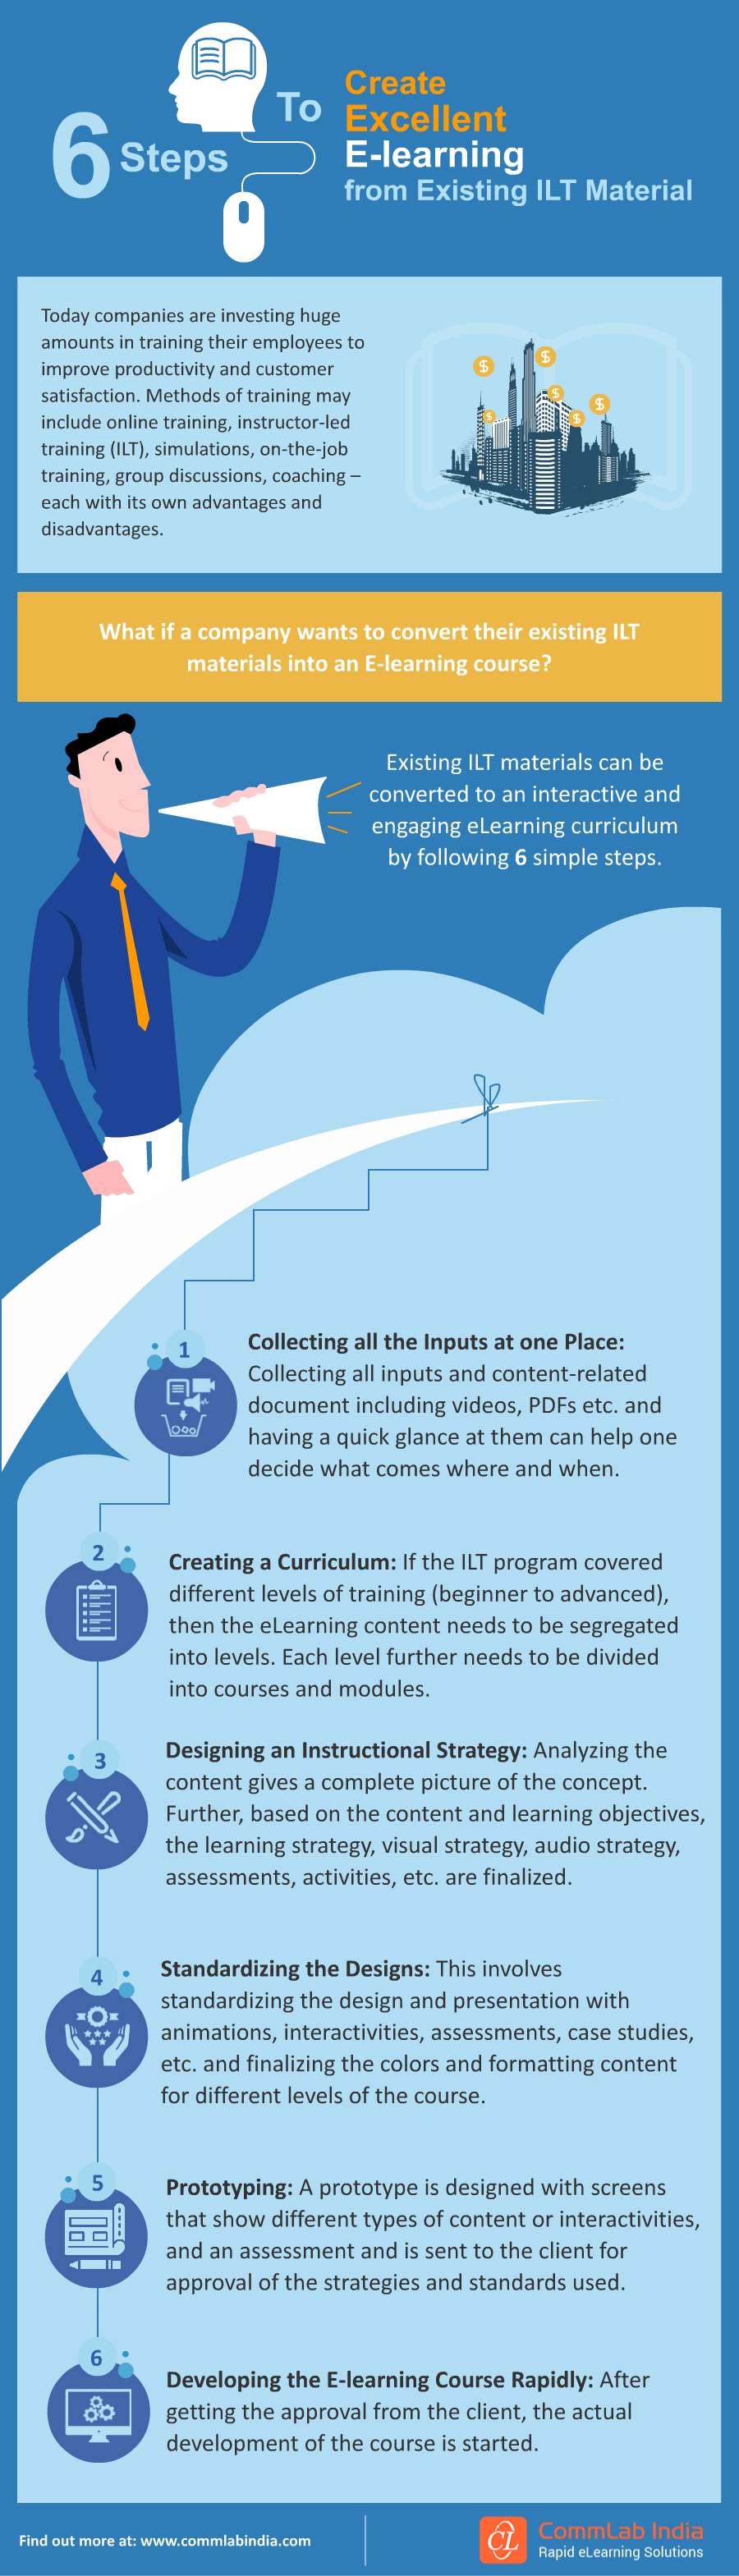 6 Simple Steps to Creating Excellent E-learning Courses from Existing ILT Materials [Infographic]